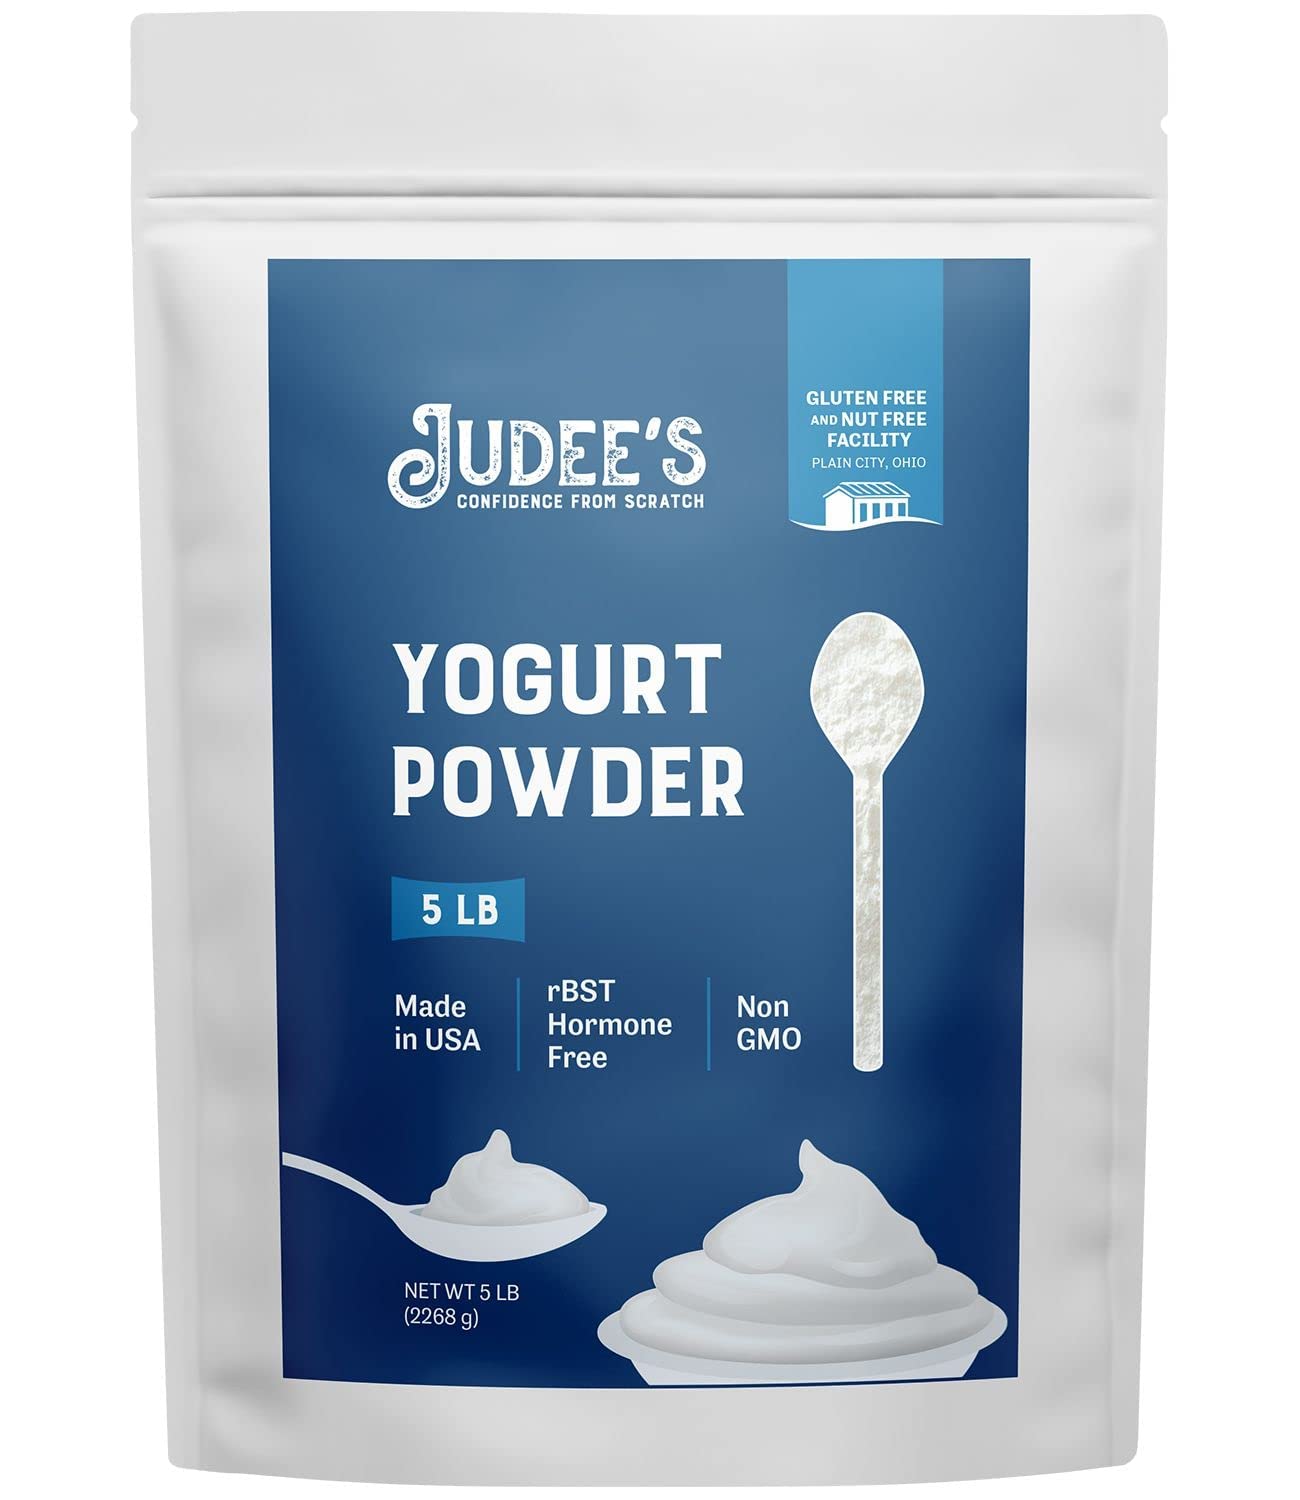 Judee’s Yogurt Powder 5 lb - 100% Non-GMO, rBST Hormone-Free - Gluten-Free & Nut-Free - Made from Real Dairy - Made in USA - Make Homemade Yogurt and Tangy Dips, Dressings, and Toppings